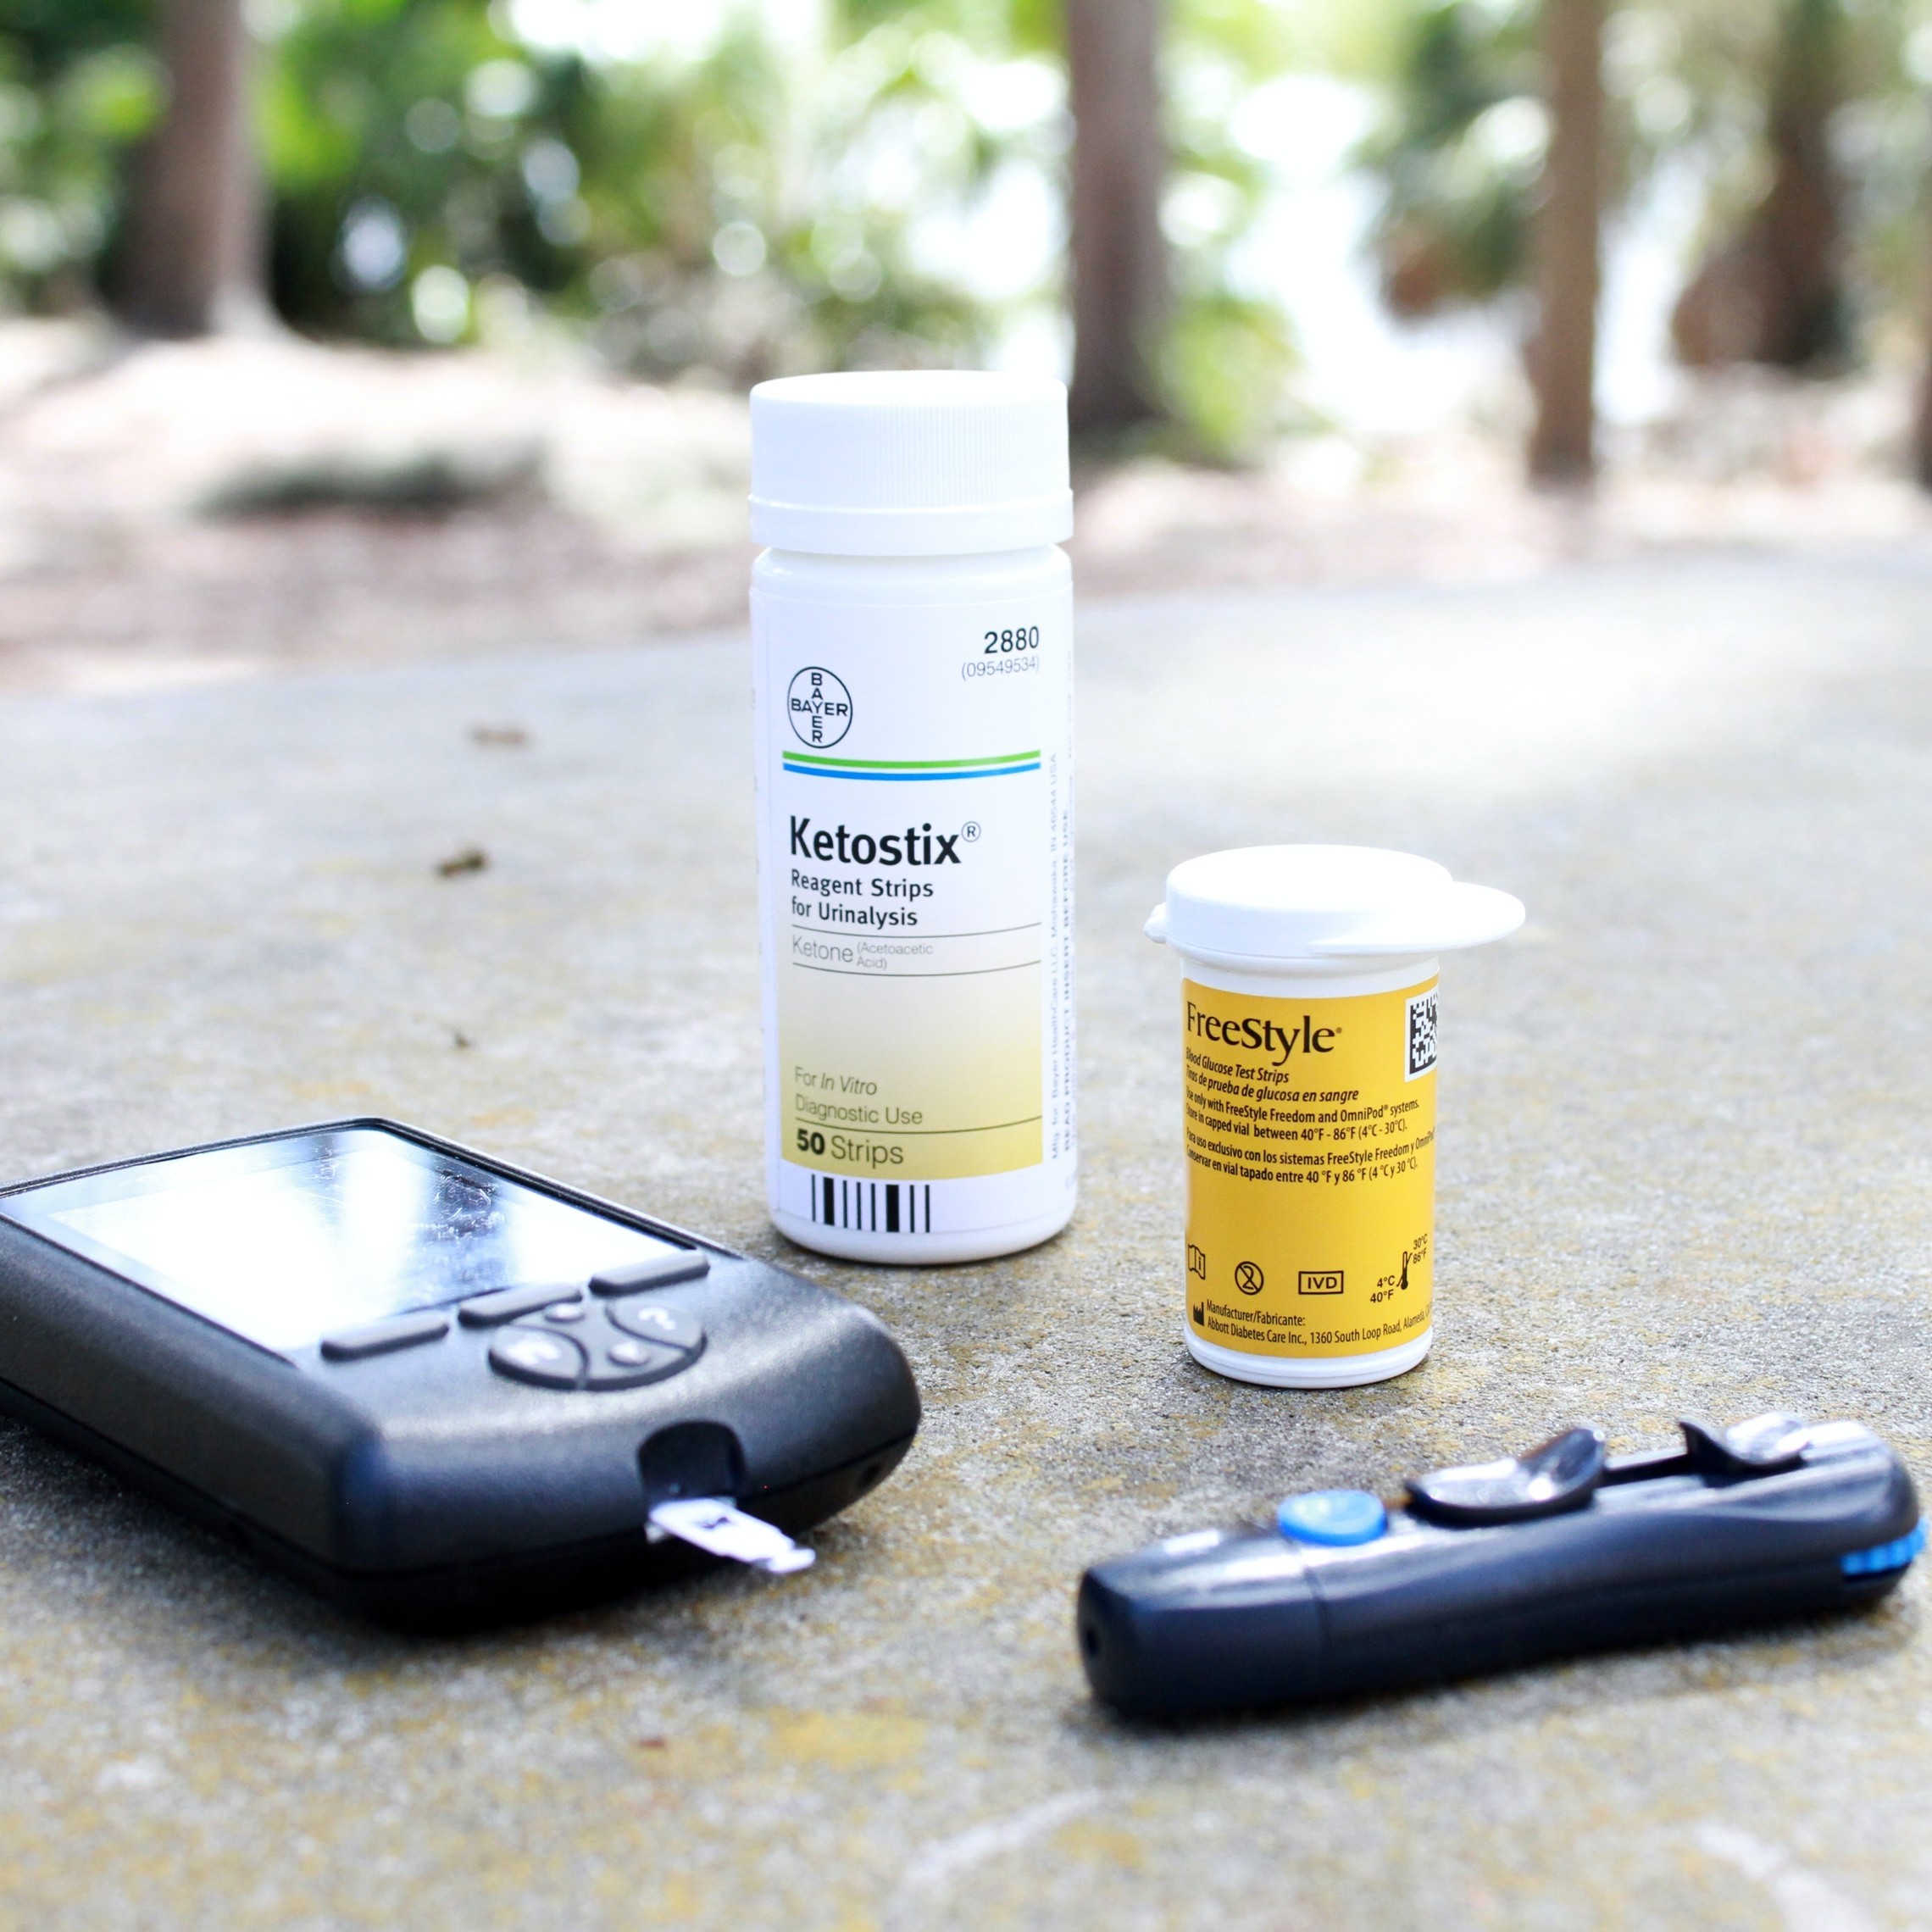 Insulin monitor and test strips